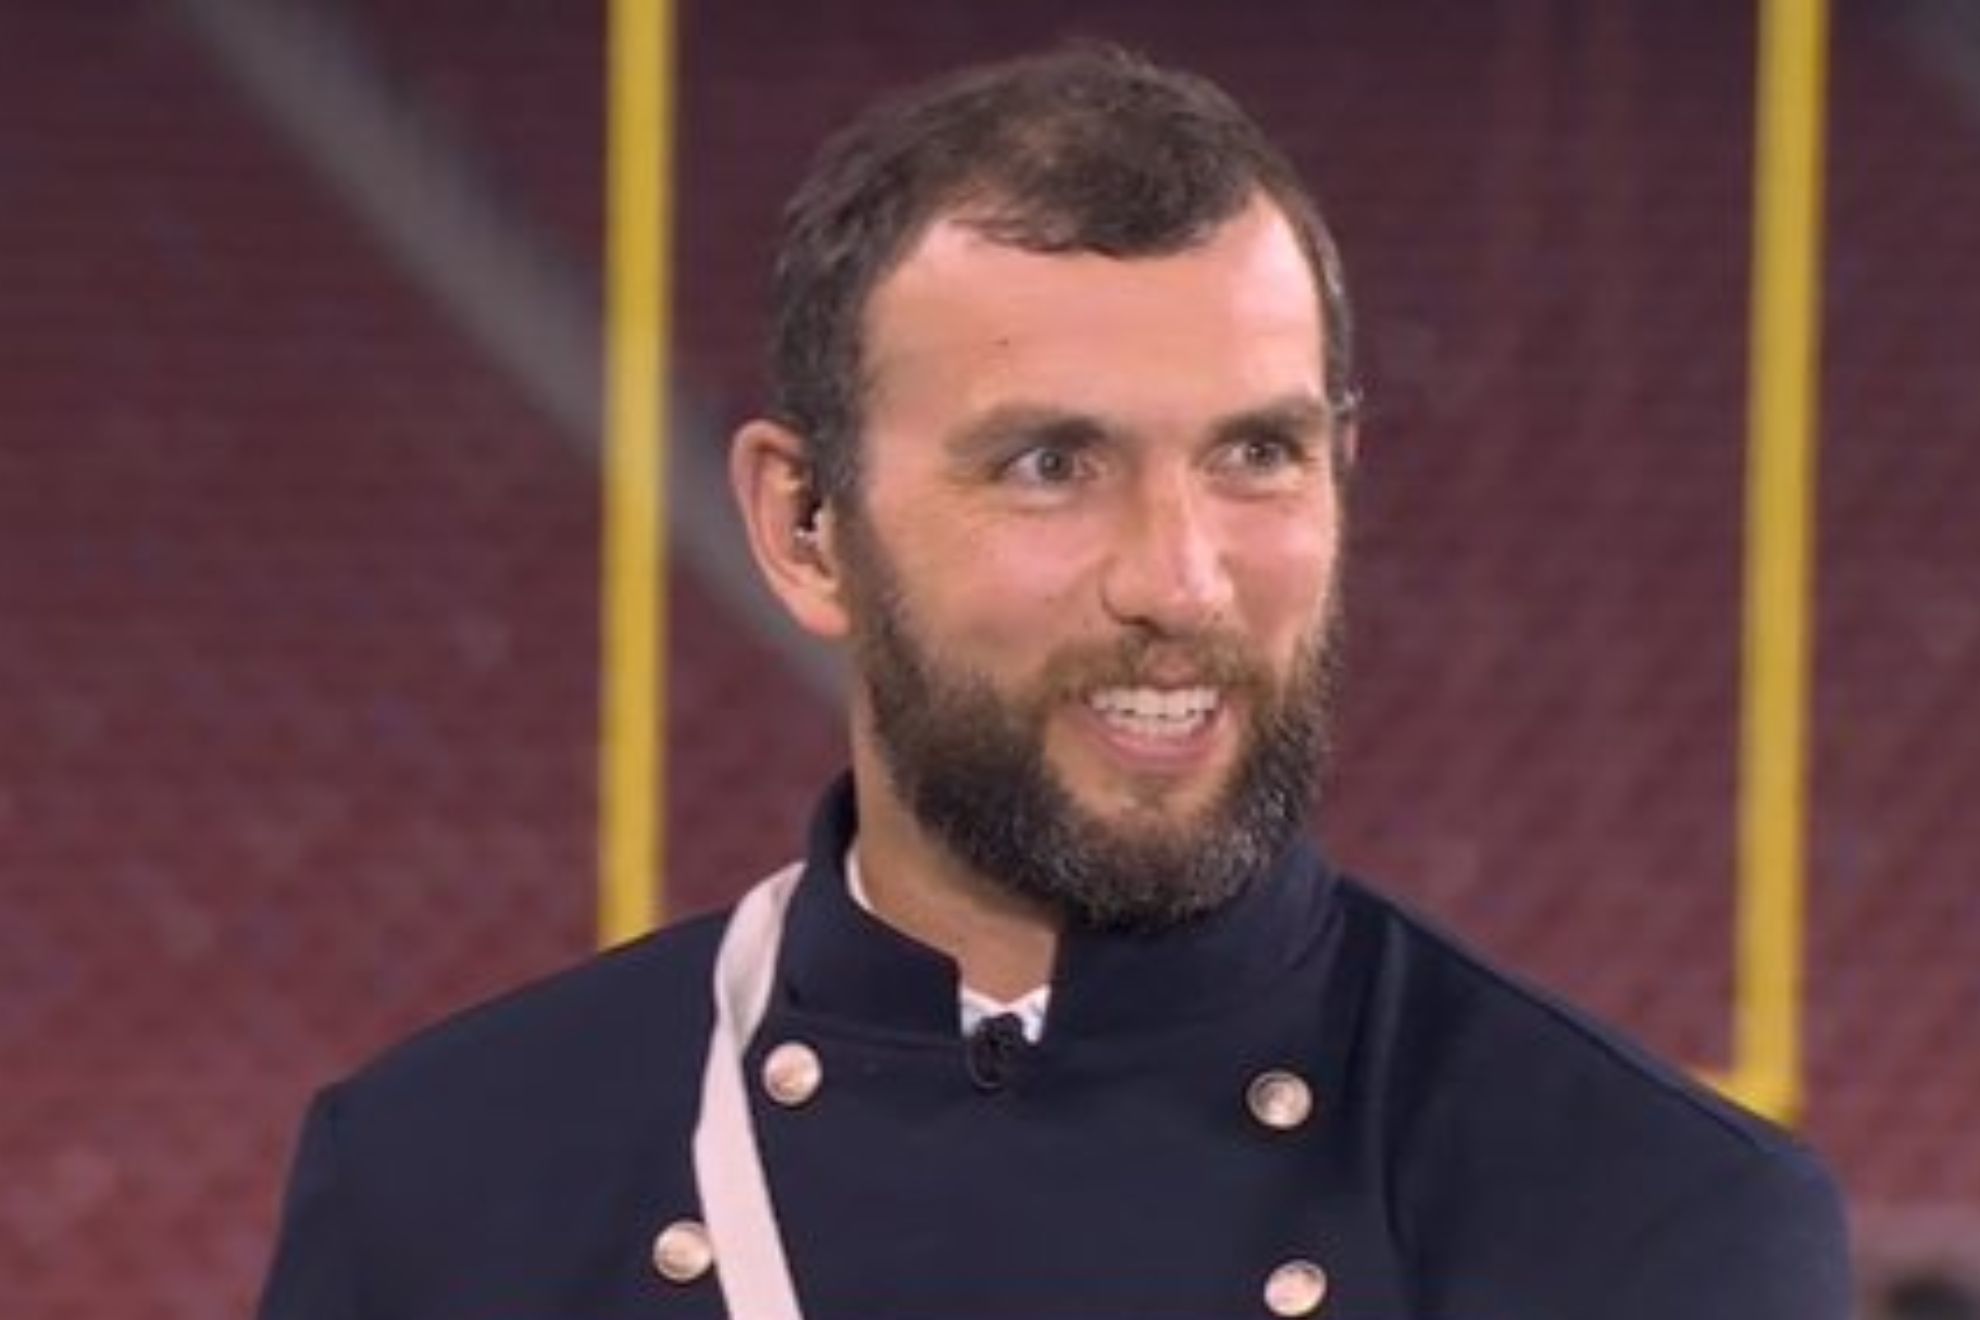 'Captain' Andrew Luck dons his Civil War alter ego to play trivia game after TNF